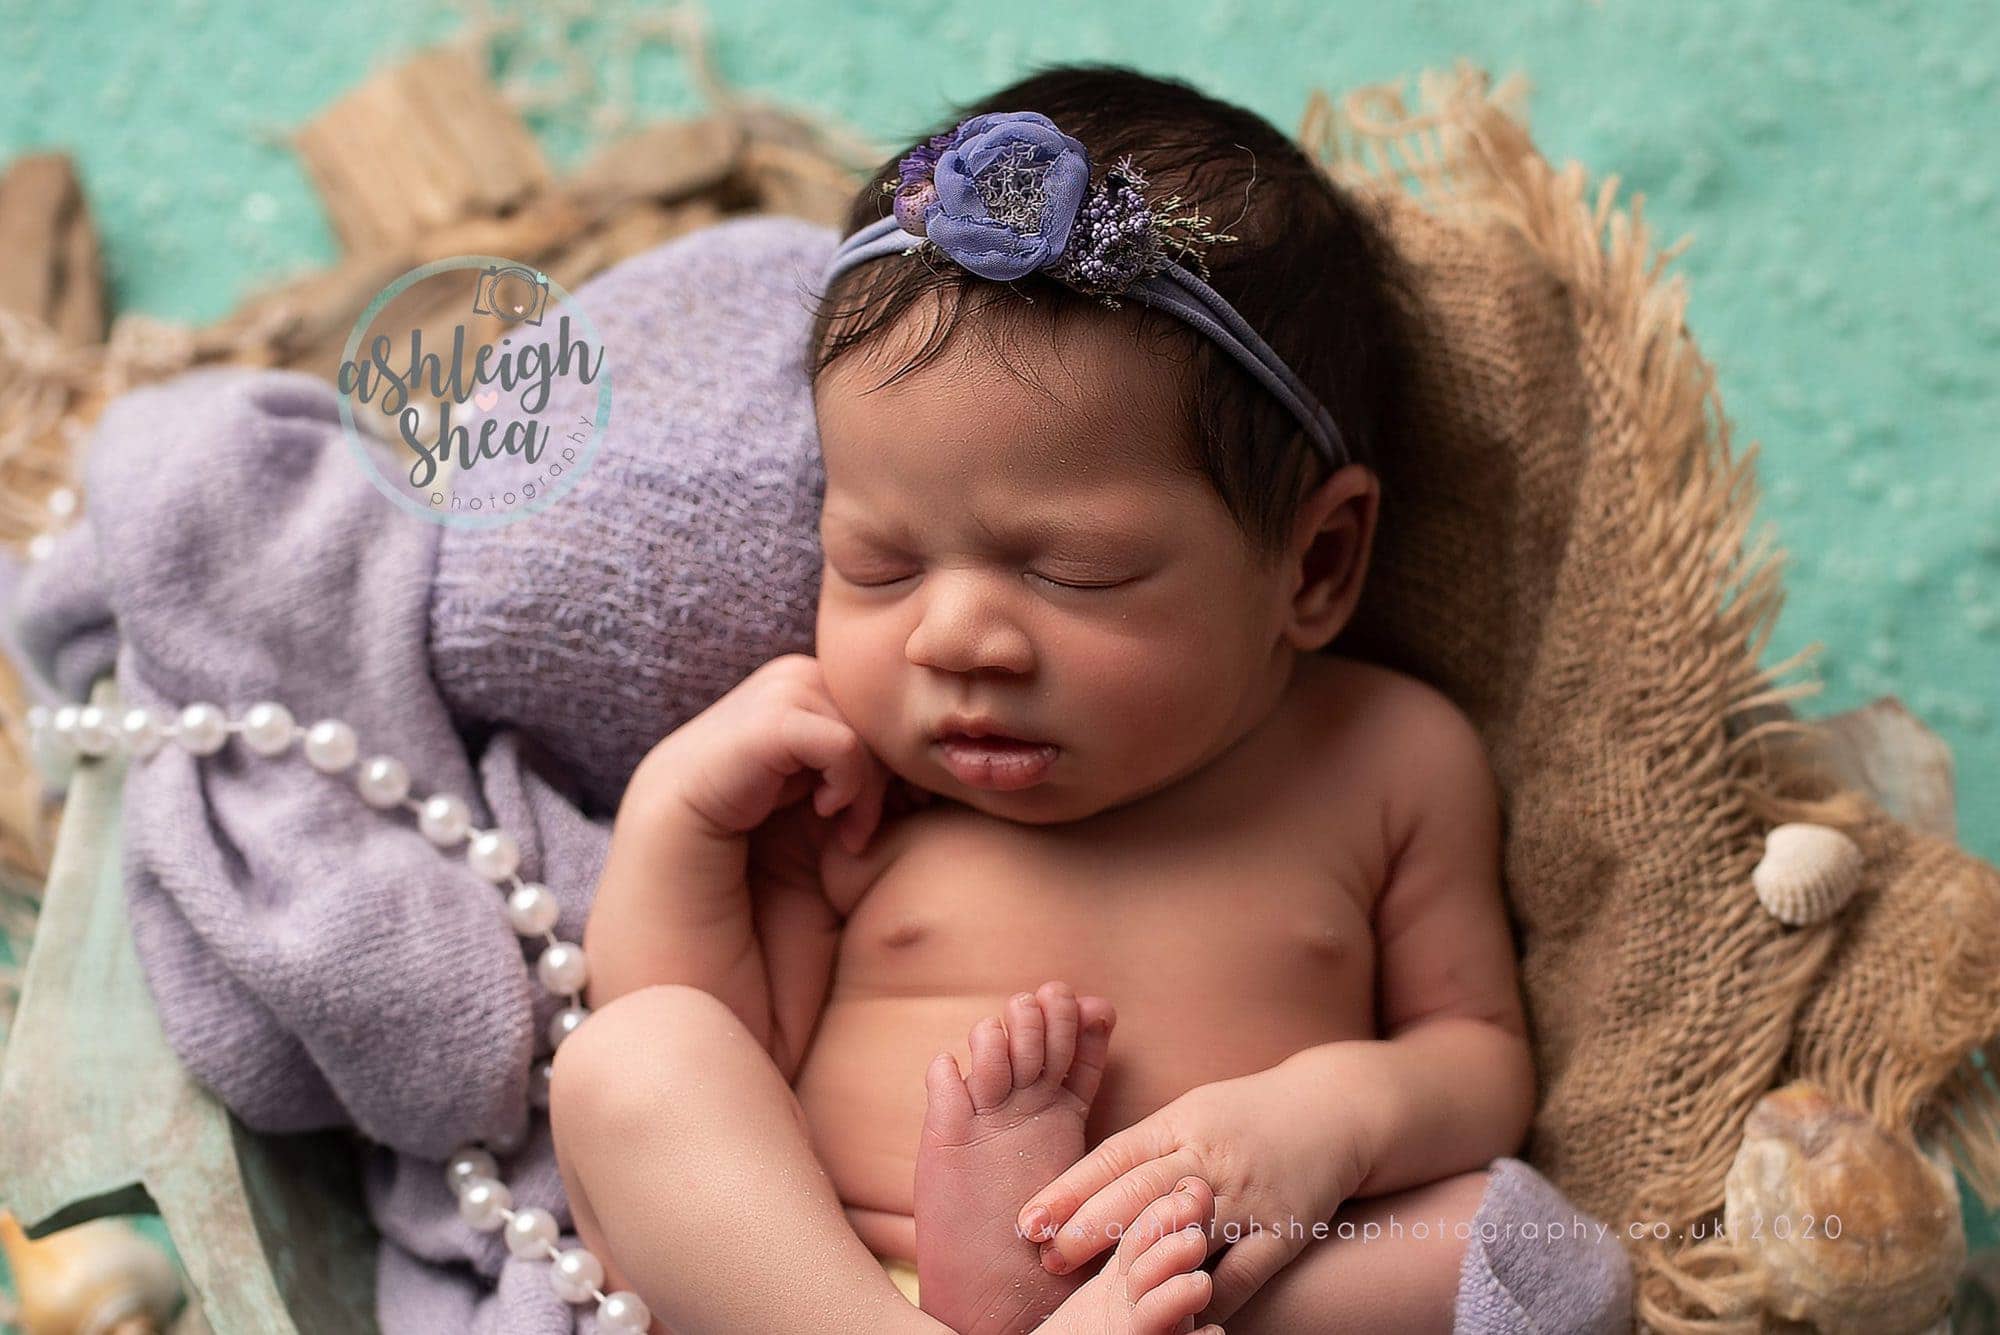 Baby Girl, Newborn Pictures, Ashleigh Shea Photography, Little Mermaid, 